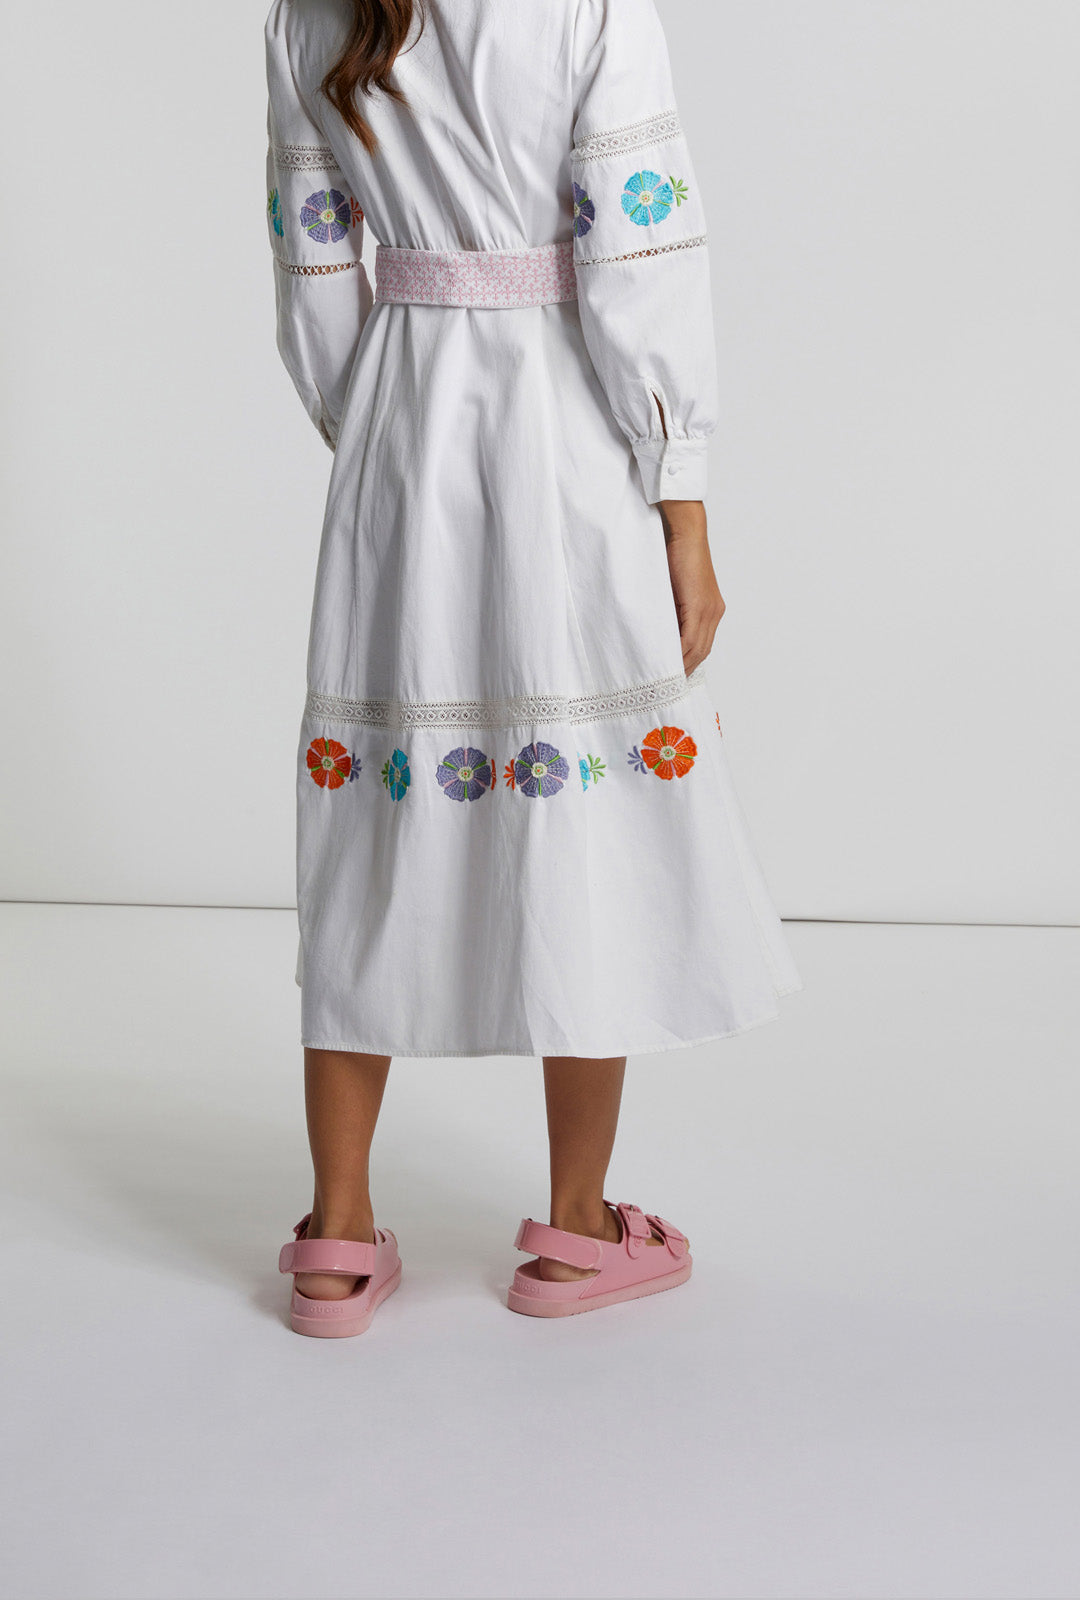 embroidered dress organic